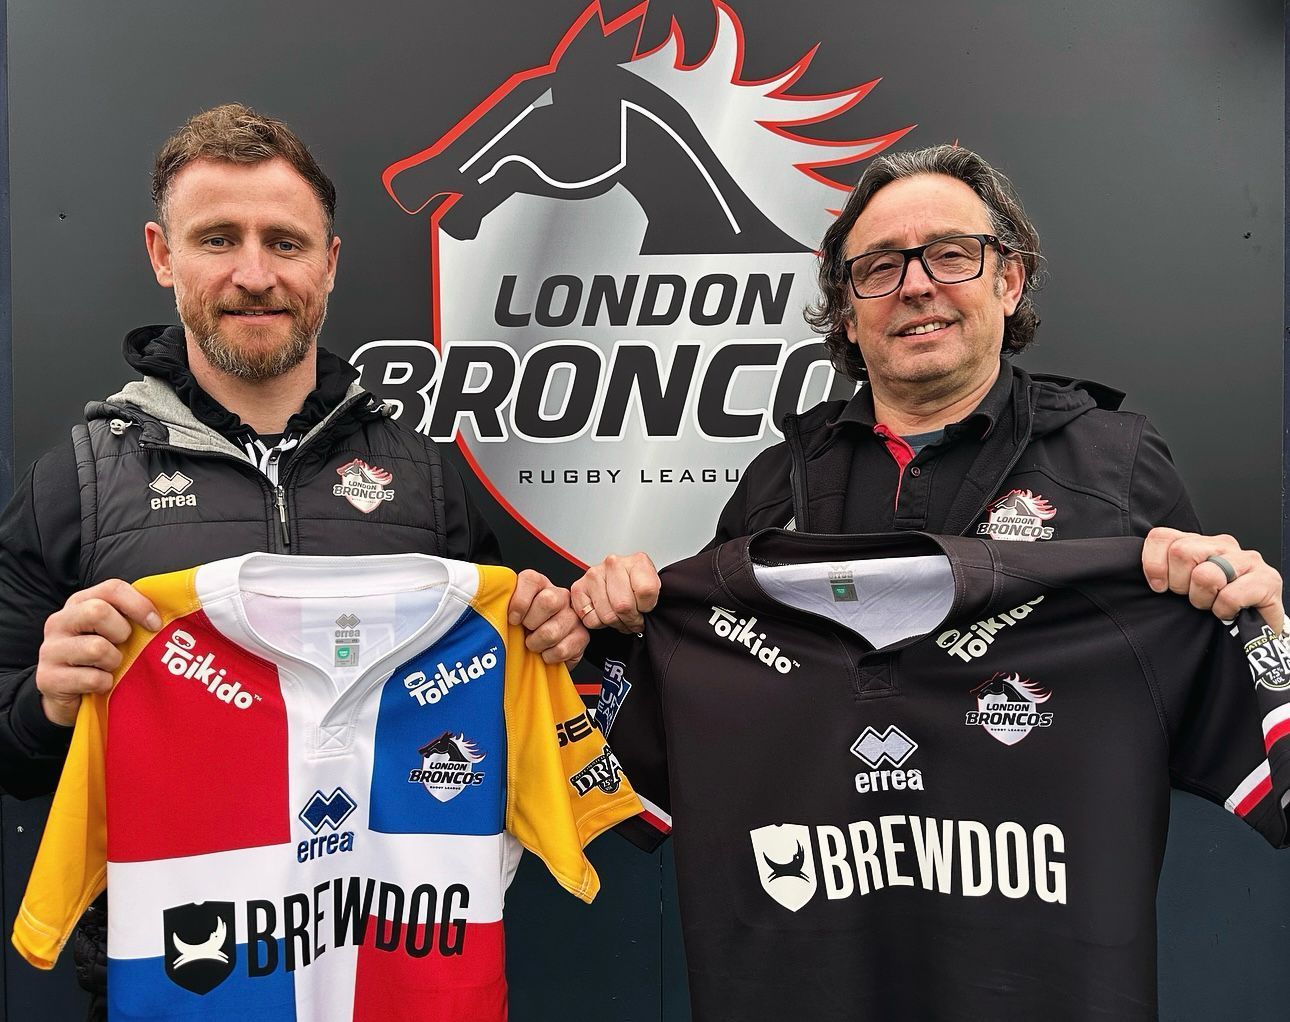 London Broncos Director of Rugby & Performance Mike Eccles (left) and Head of Commercial Mark Kemp (Right)